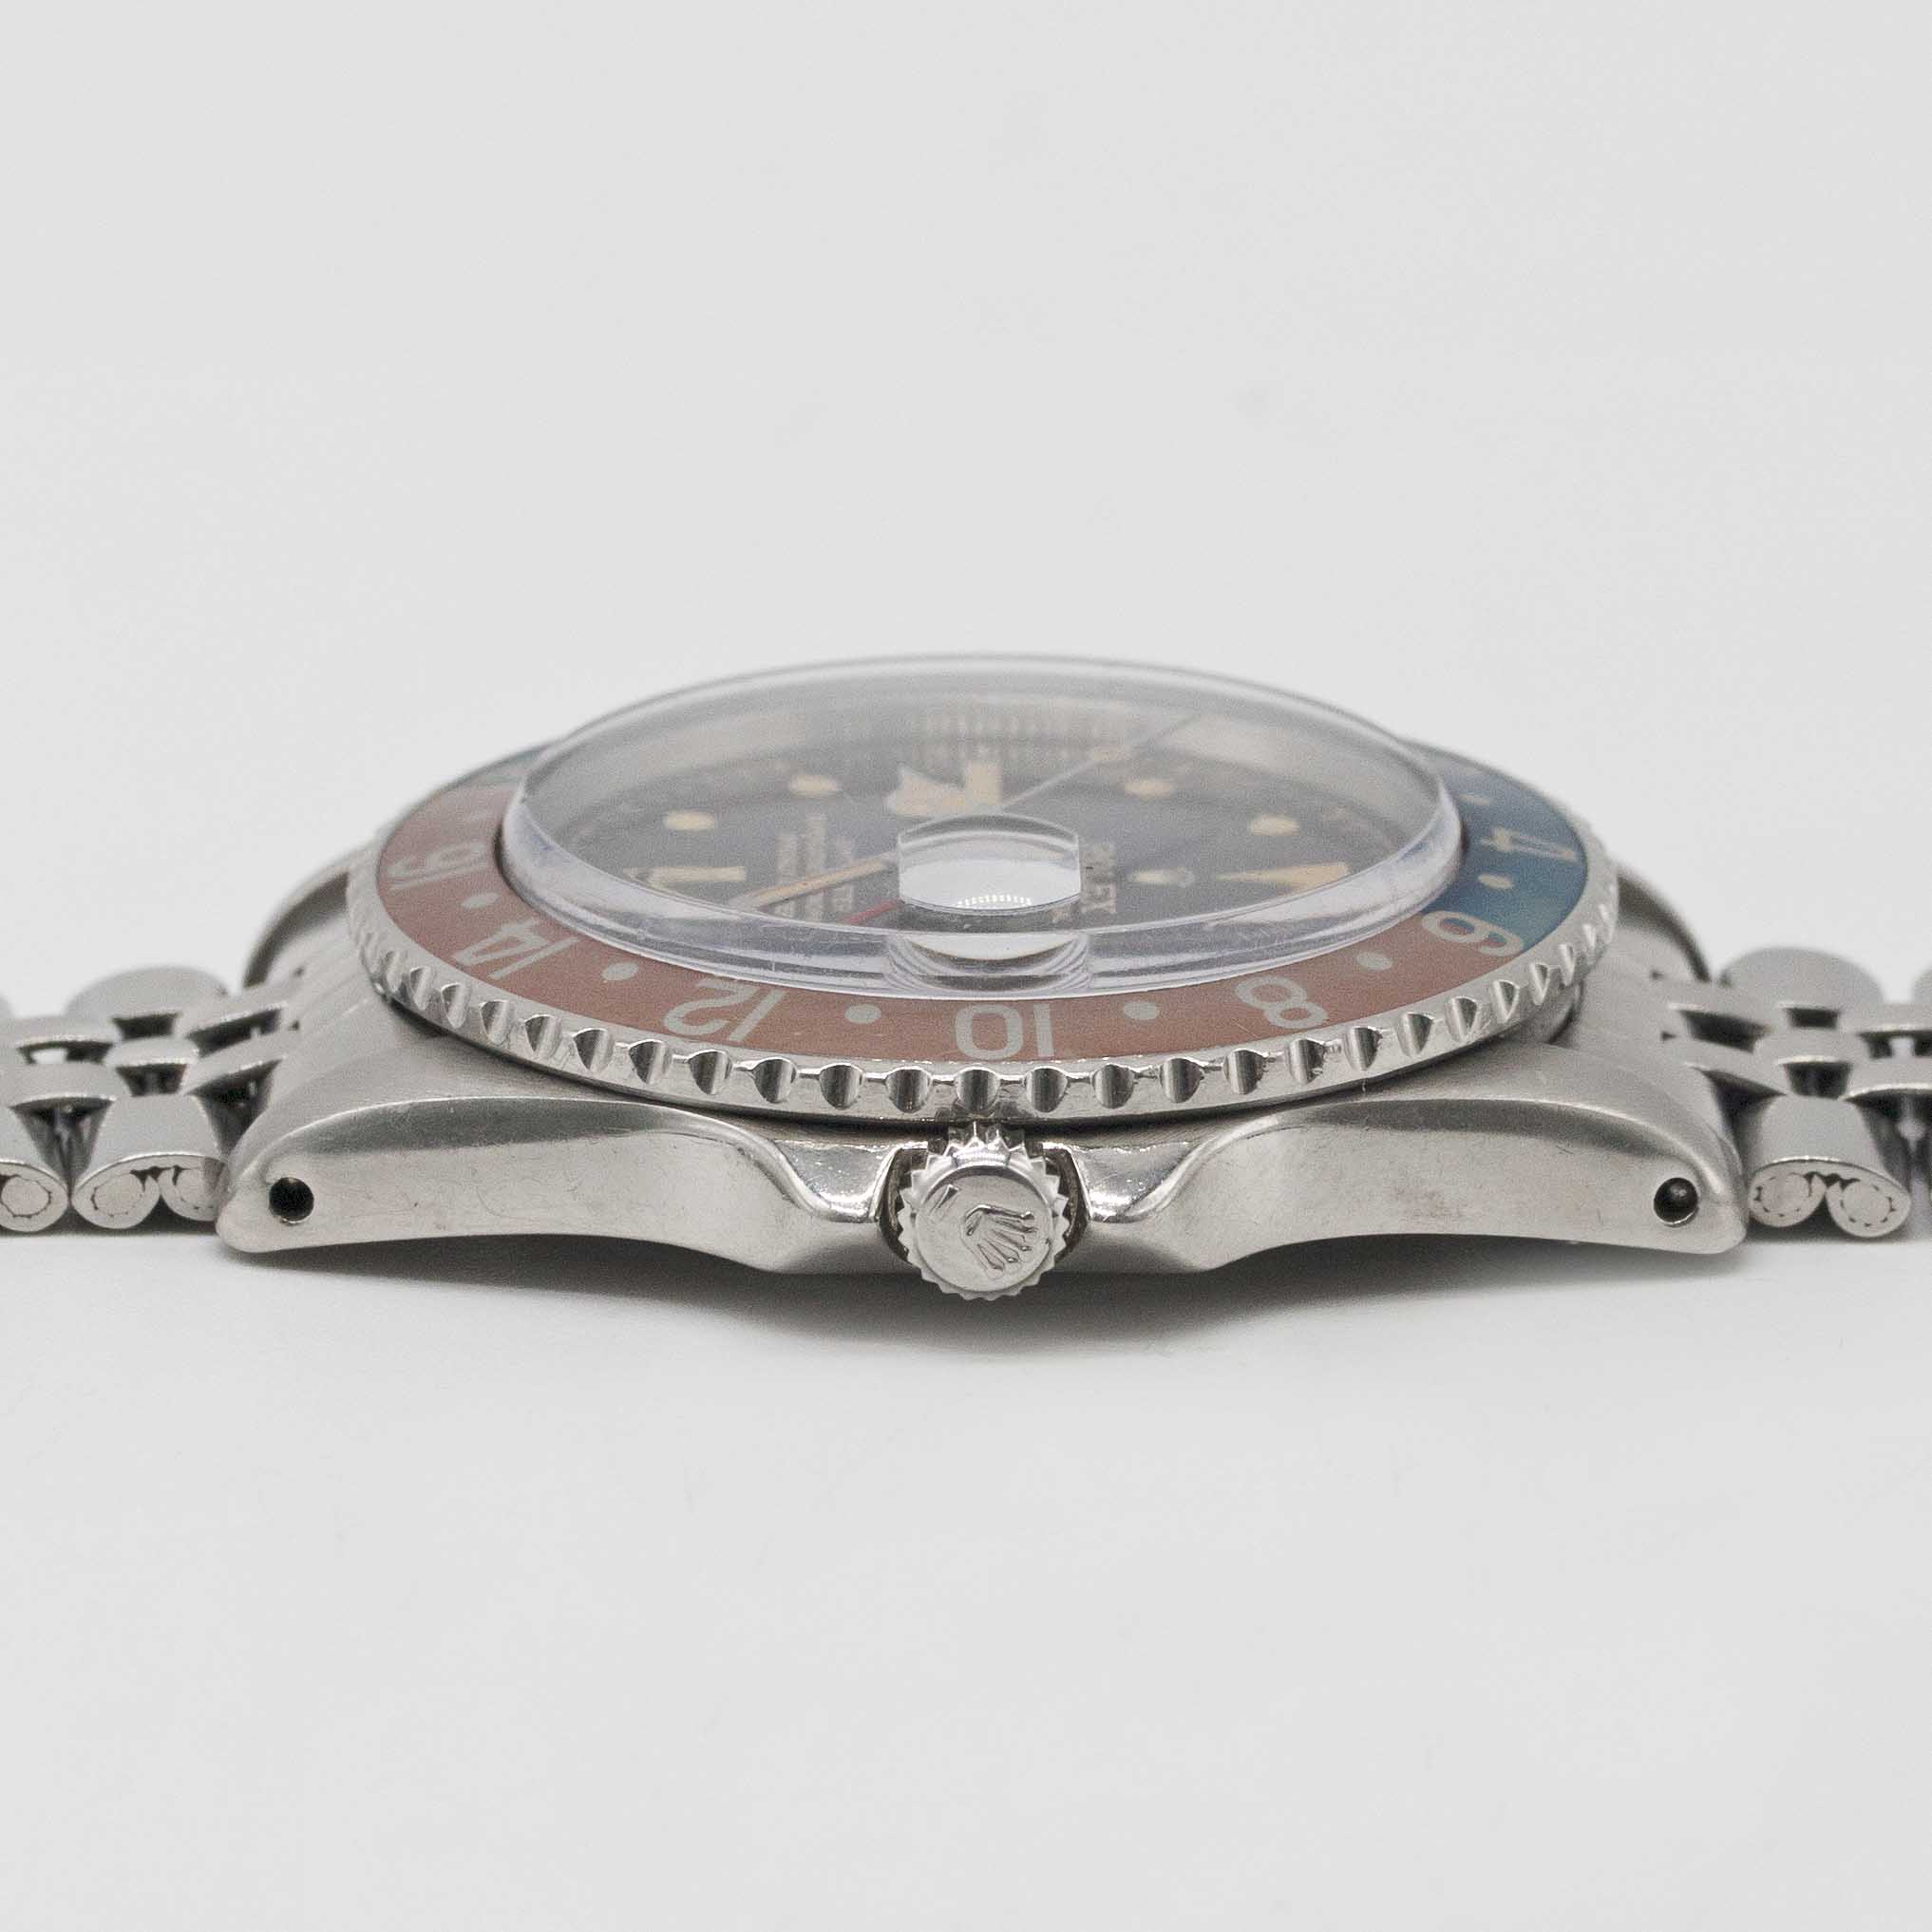 A RARE GENTLEMAN'S STAINLESS STEEL ROLEX OYSTER PERPETUAL GMT MASTER BRACELET WATCH CIRCA 1961, REF. - Image 10 of 11